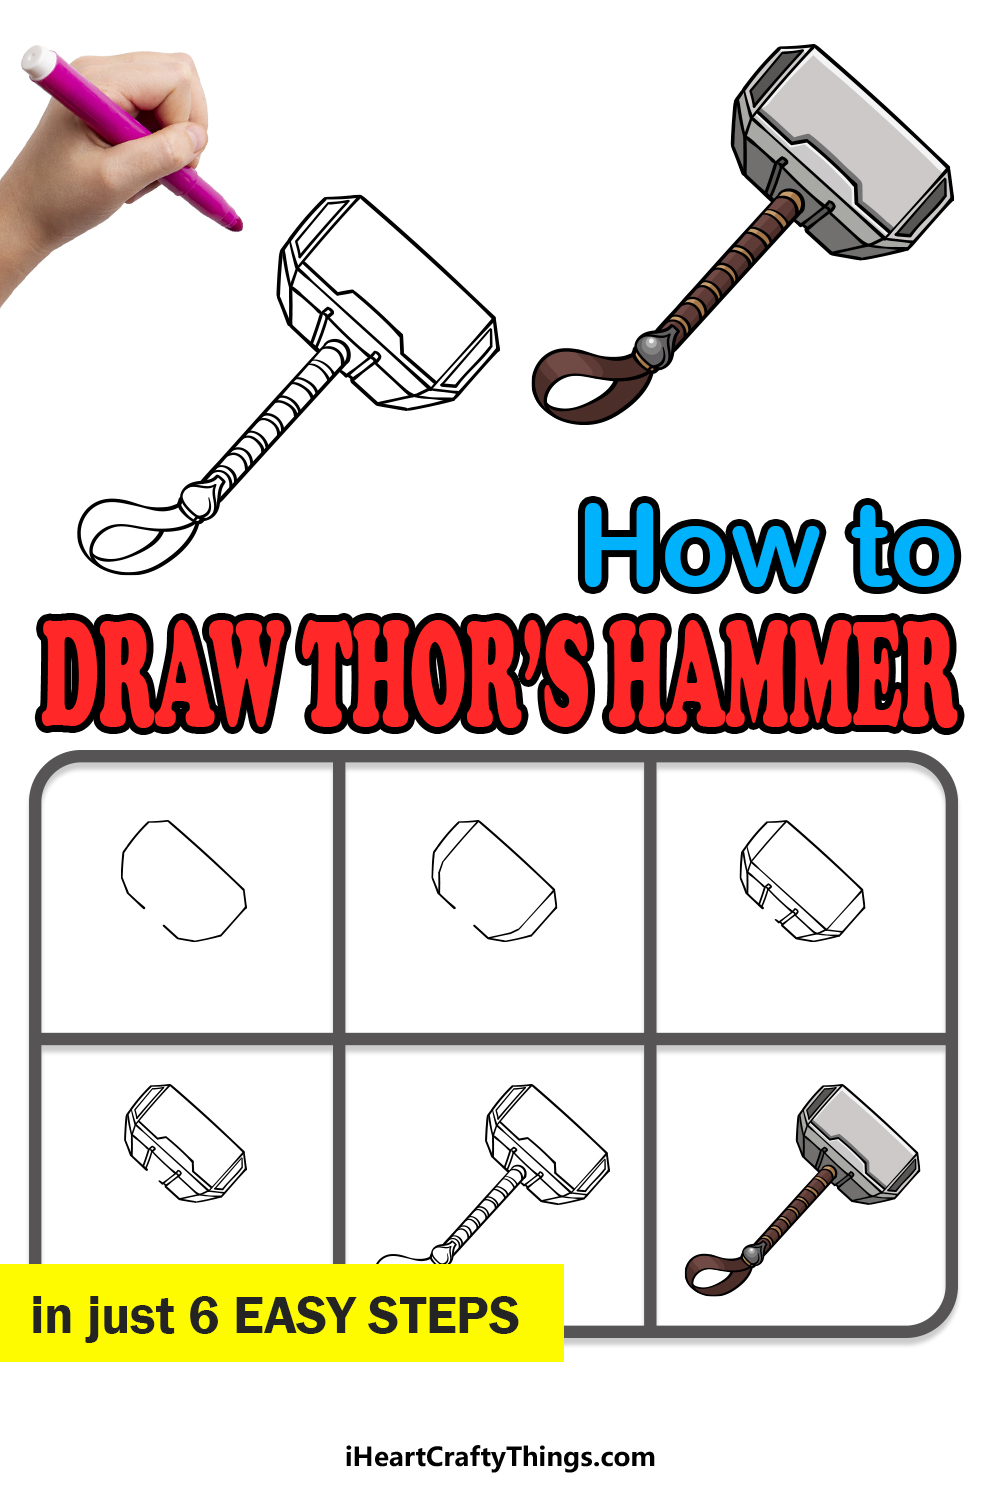 how to draw Thor’s hammer in 6 easy steps